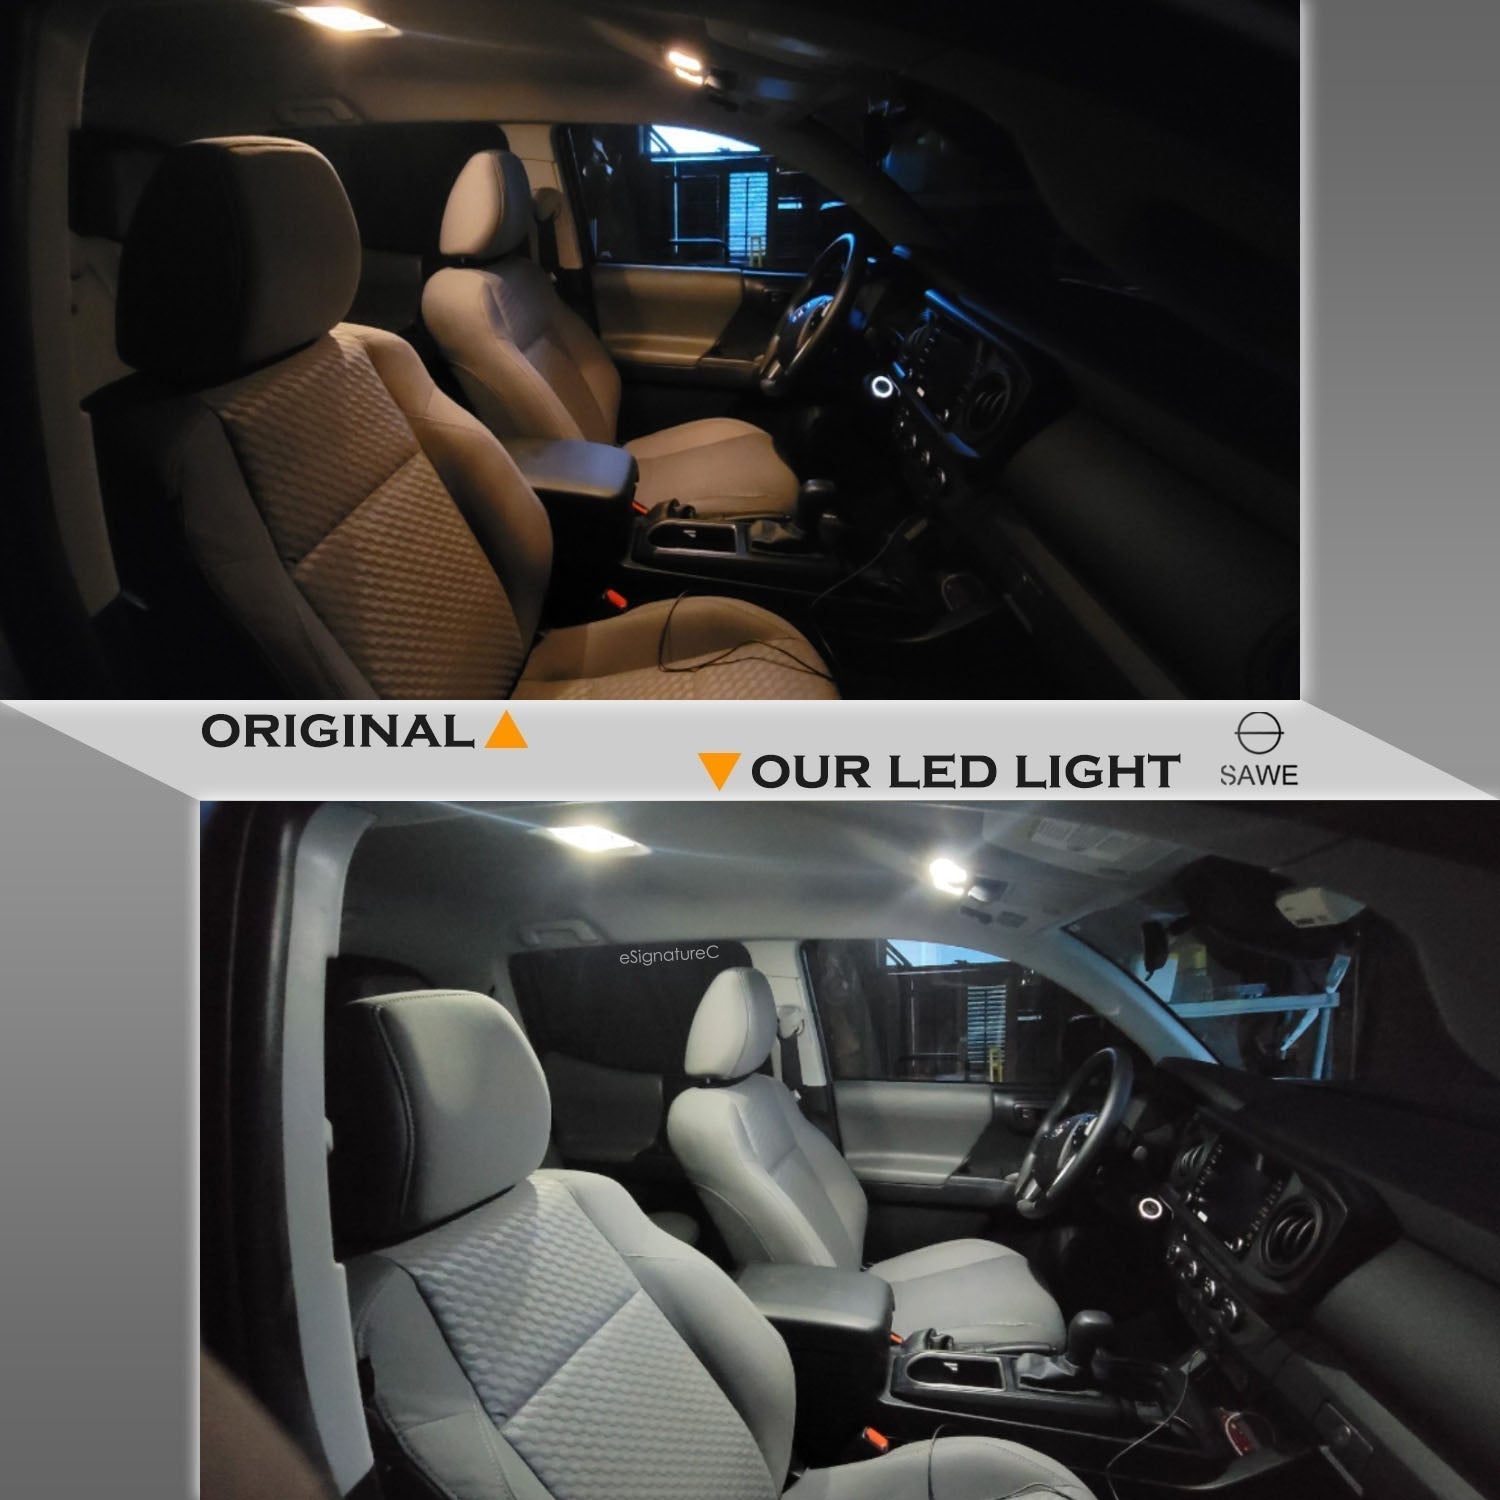 For Acura MDX Interior LED Lights - Dome & Map Light Bulbs Package Kit for 2001 - 2006 - White